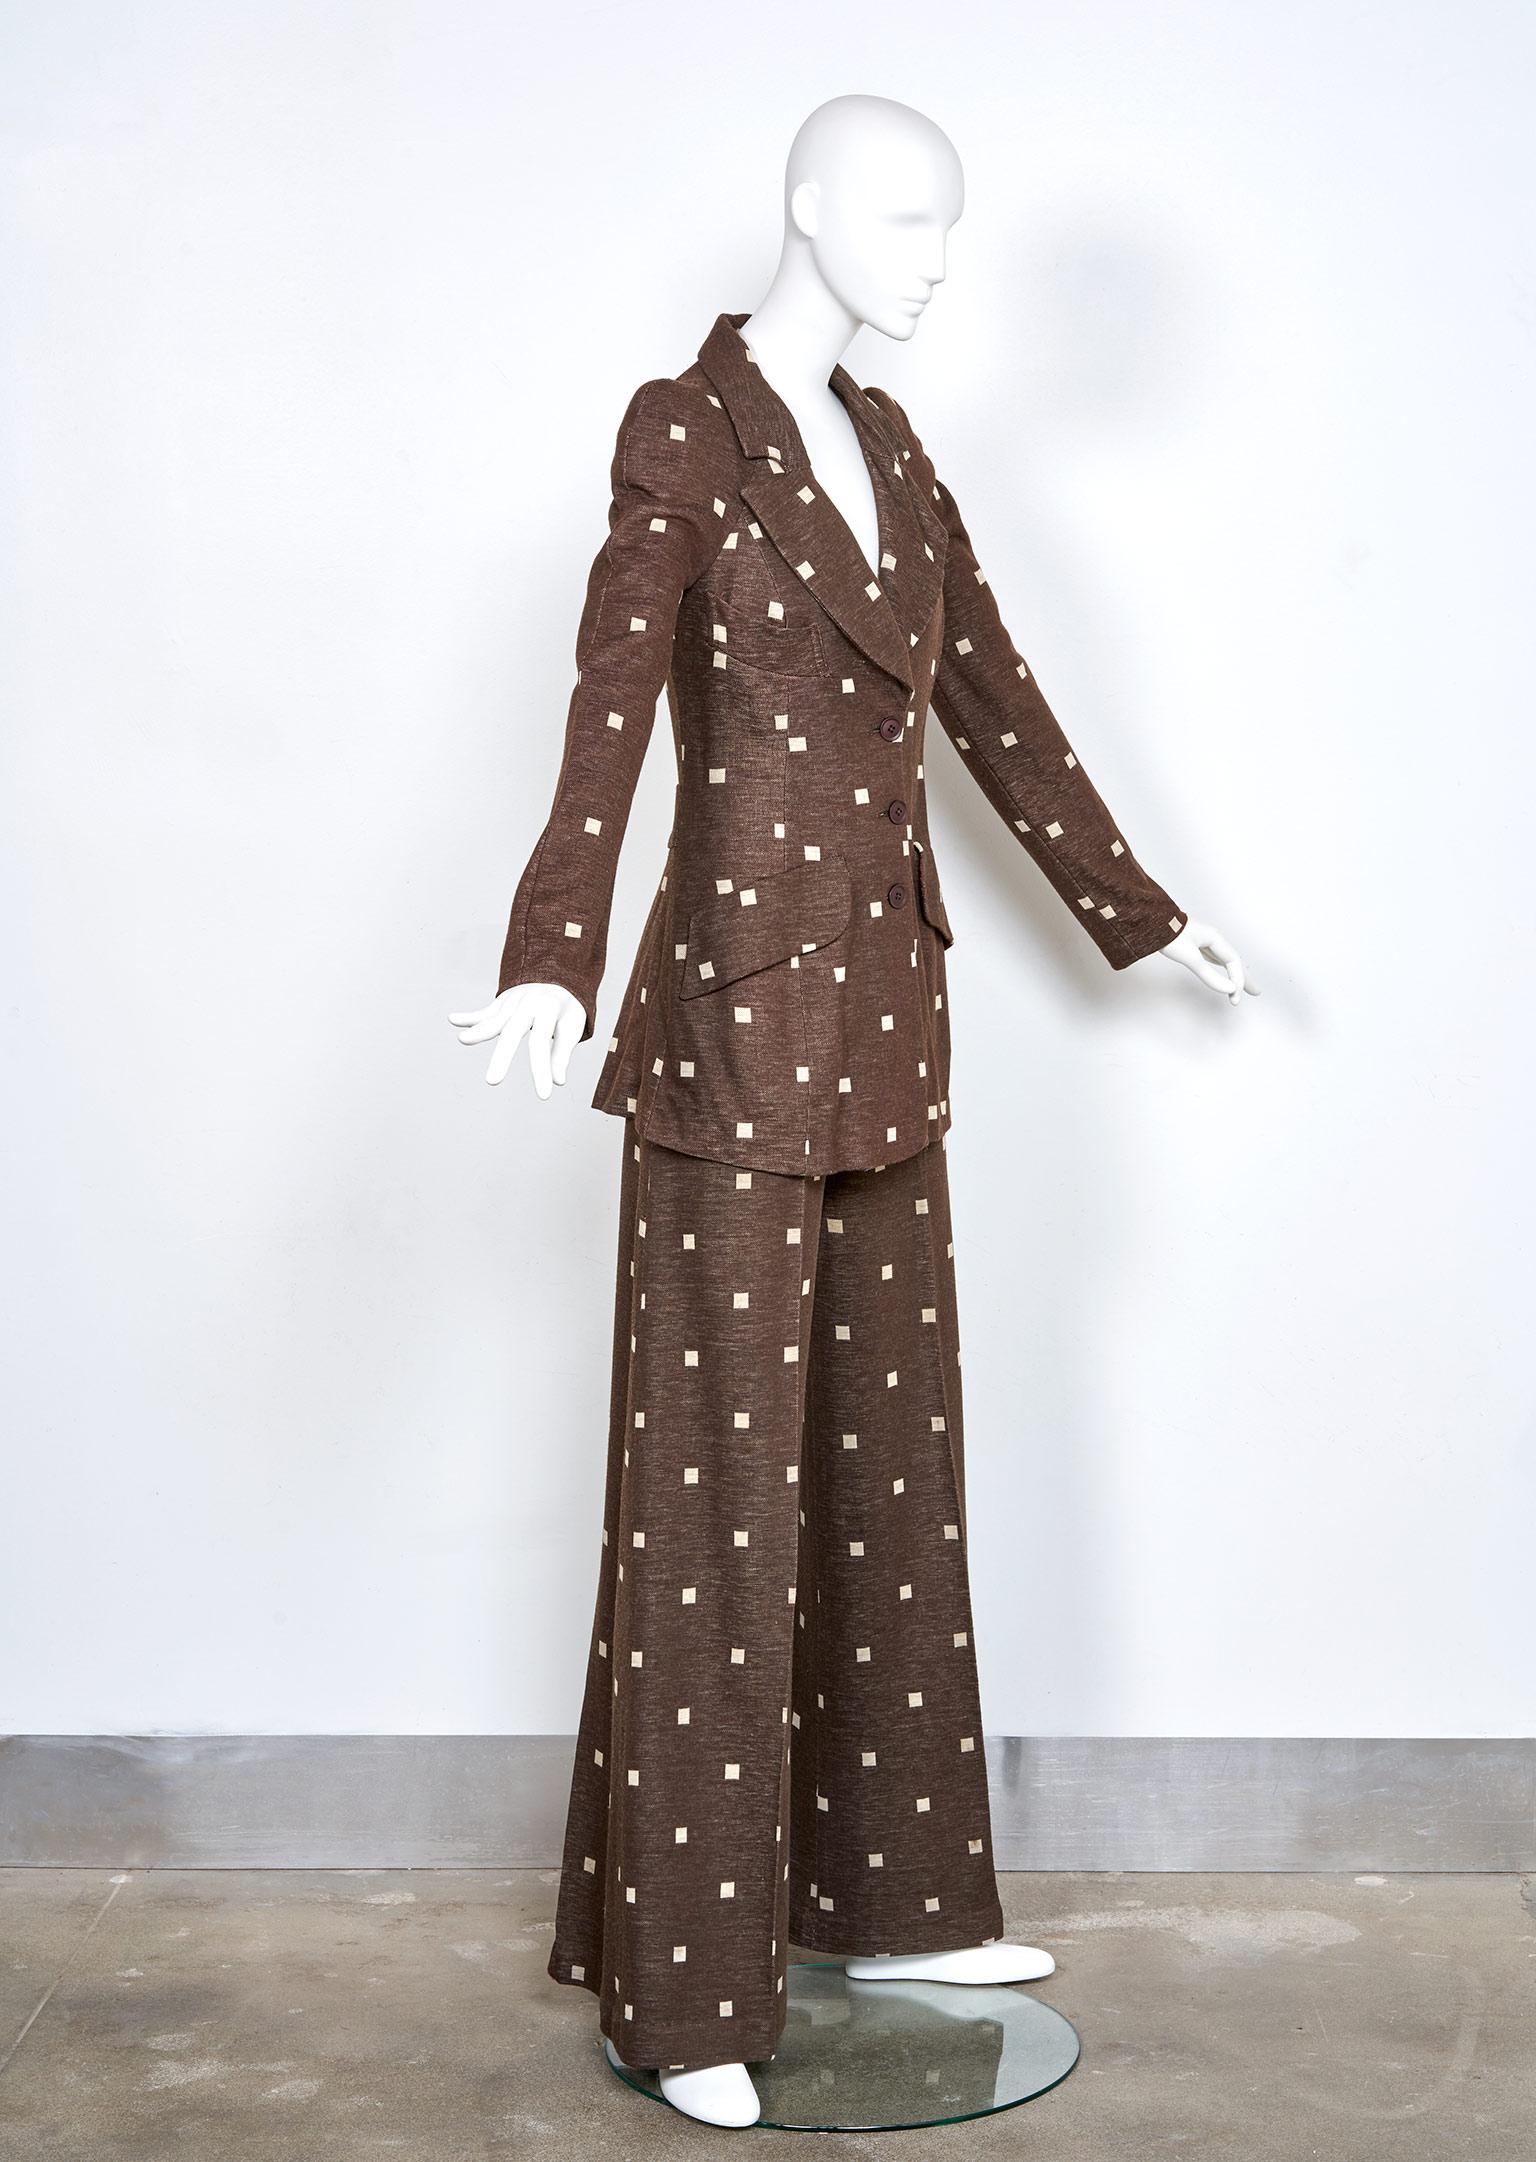 When Barbara Hulanicki launched the concept of the bell bottom Power Suit in her Biba London boutique, sales went off the charts. Offered here, an iconic example in heathery chocolate brown, imbued with contrasting creme mod square motif.